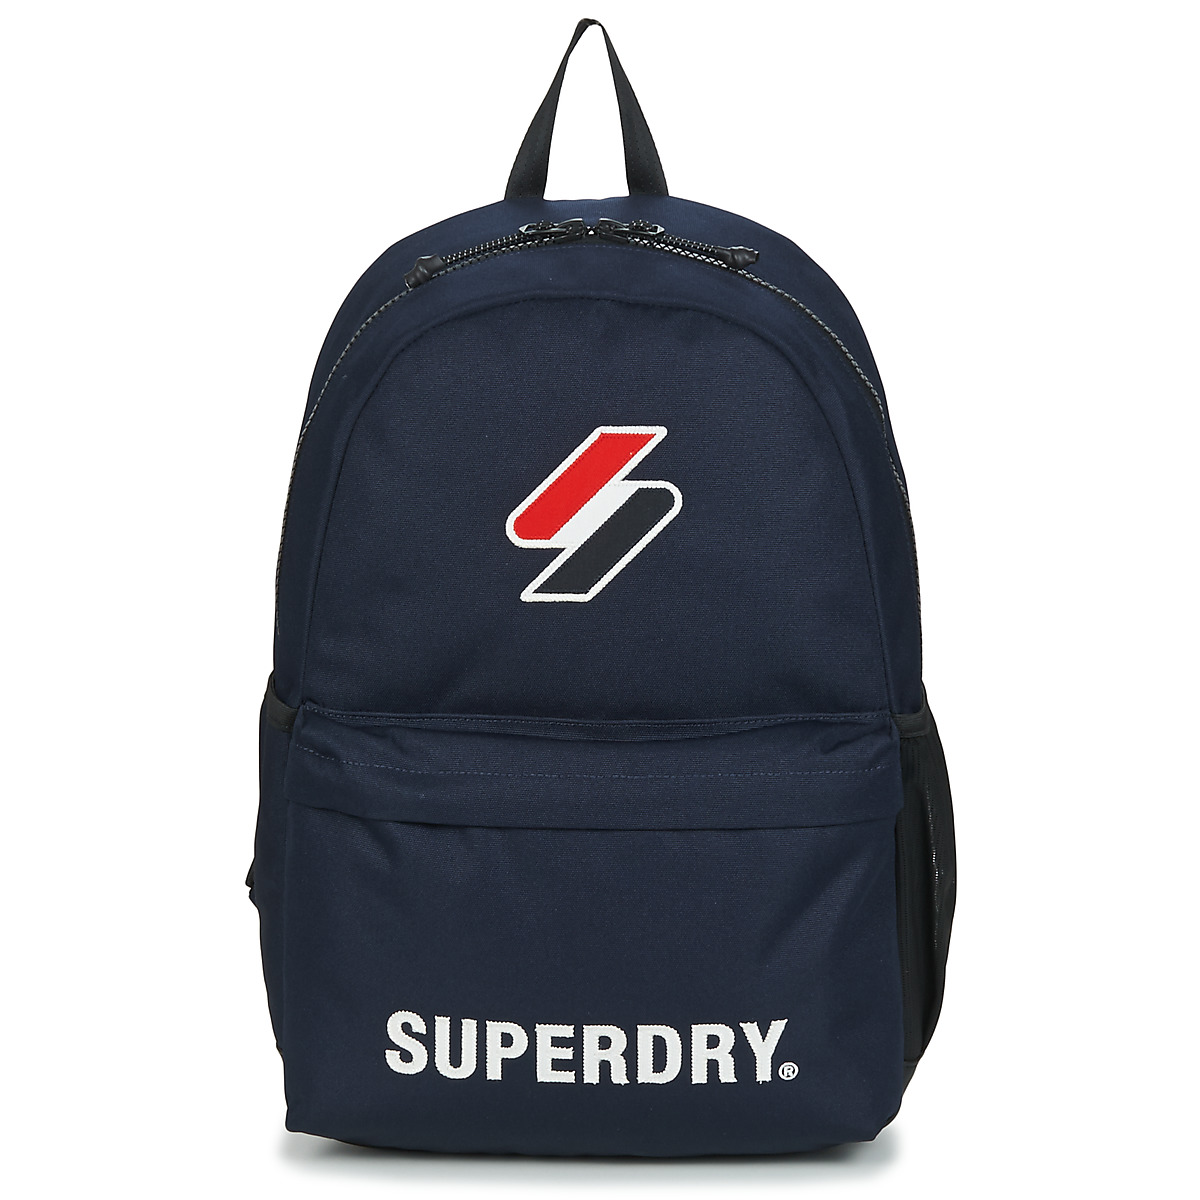 Superdry  SUPERDRY CODE MONTANA  men's Backpack in Blue. Sizes available:One size